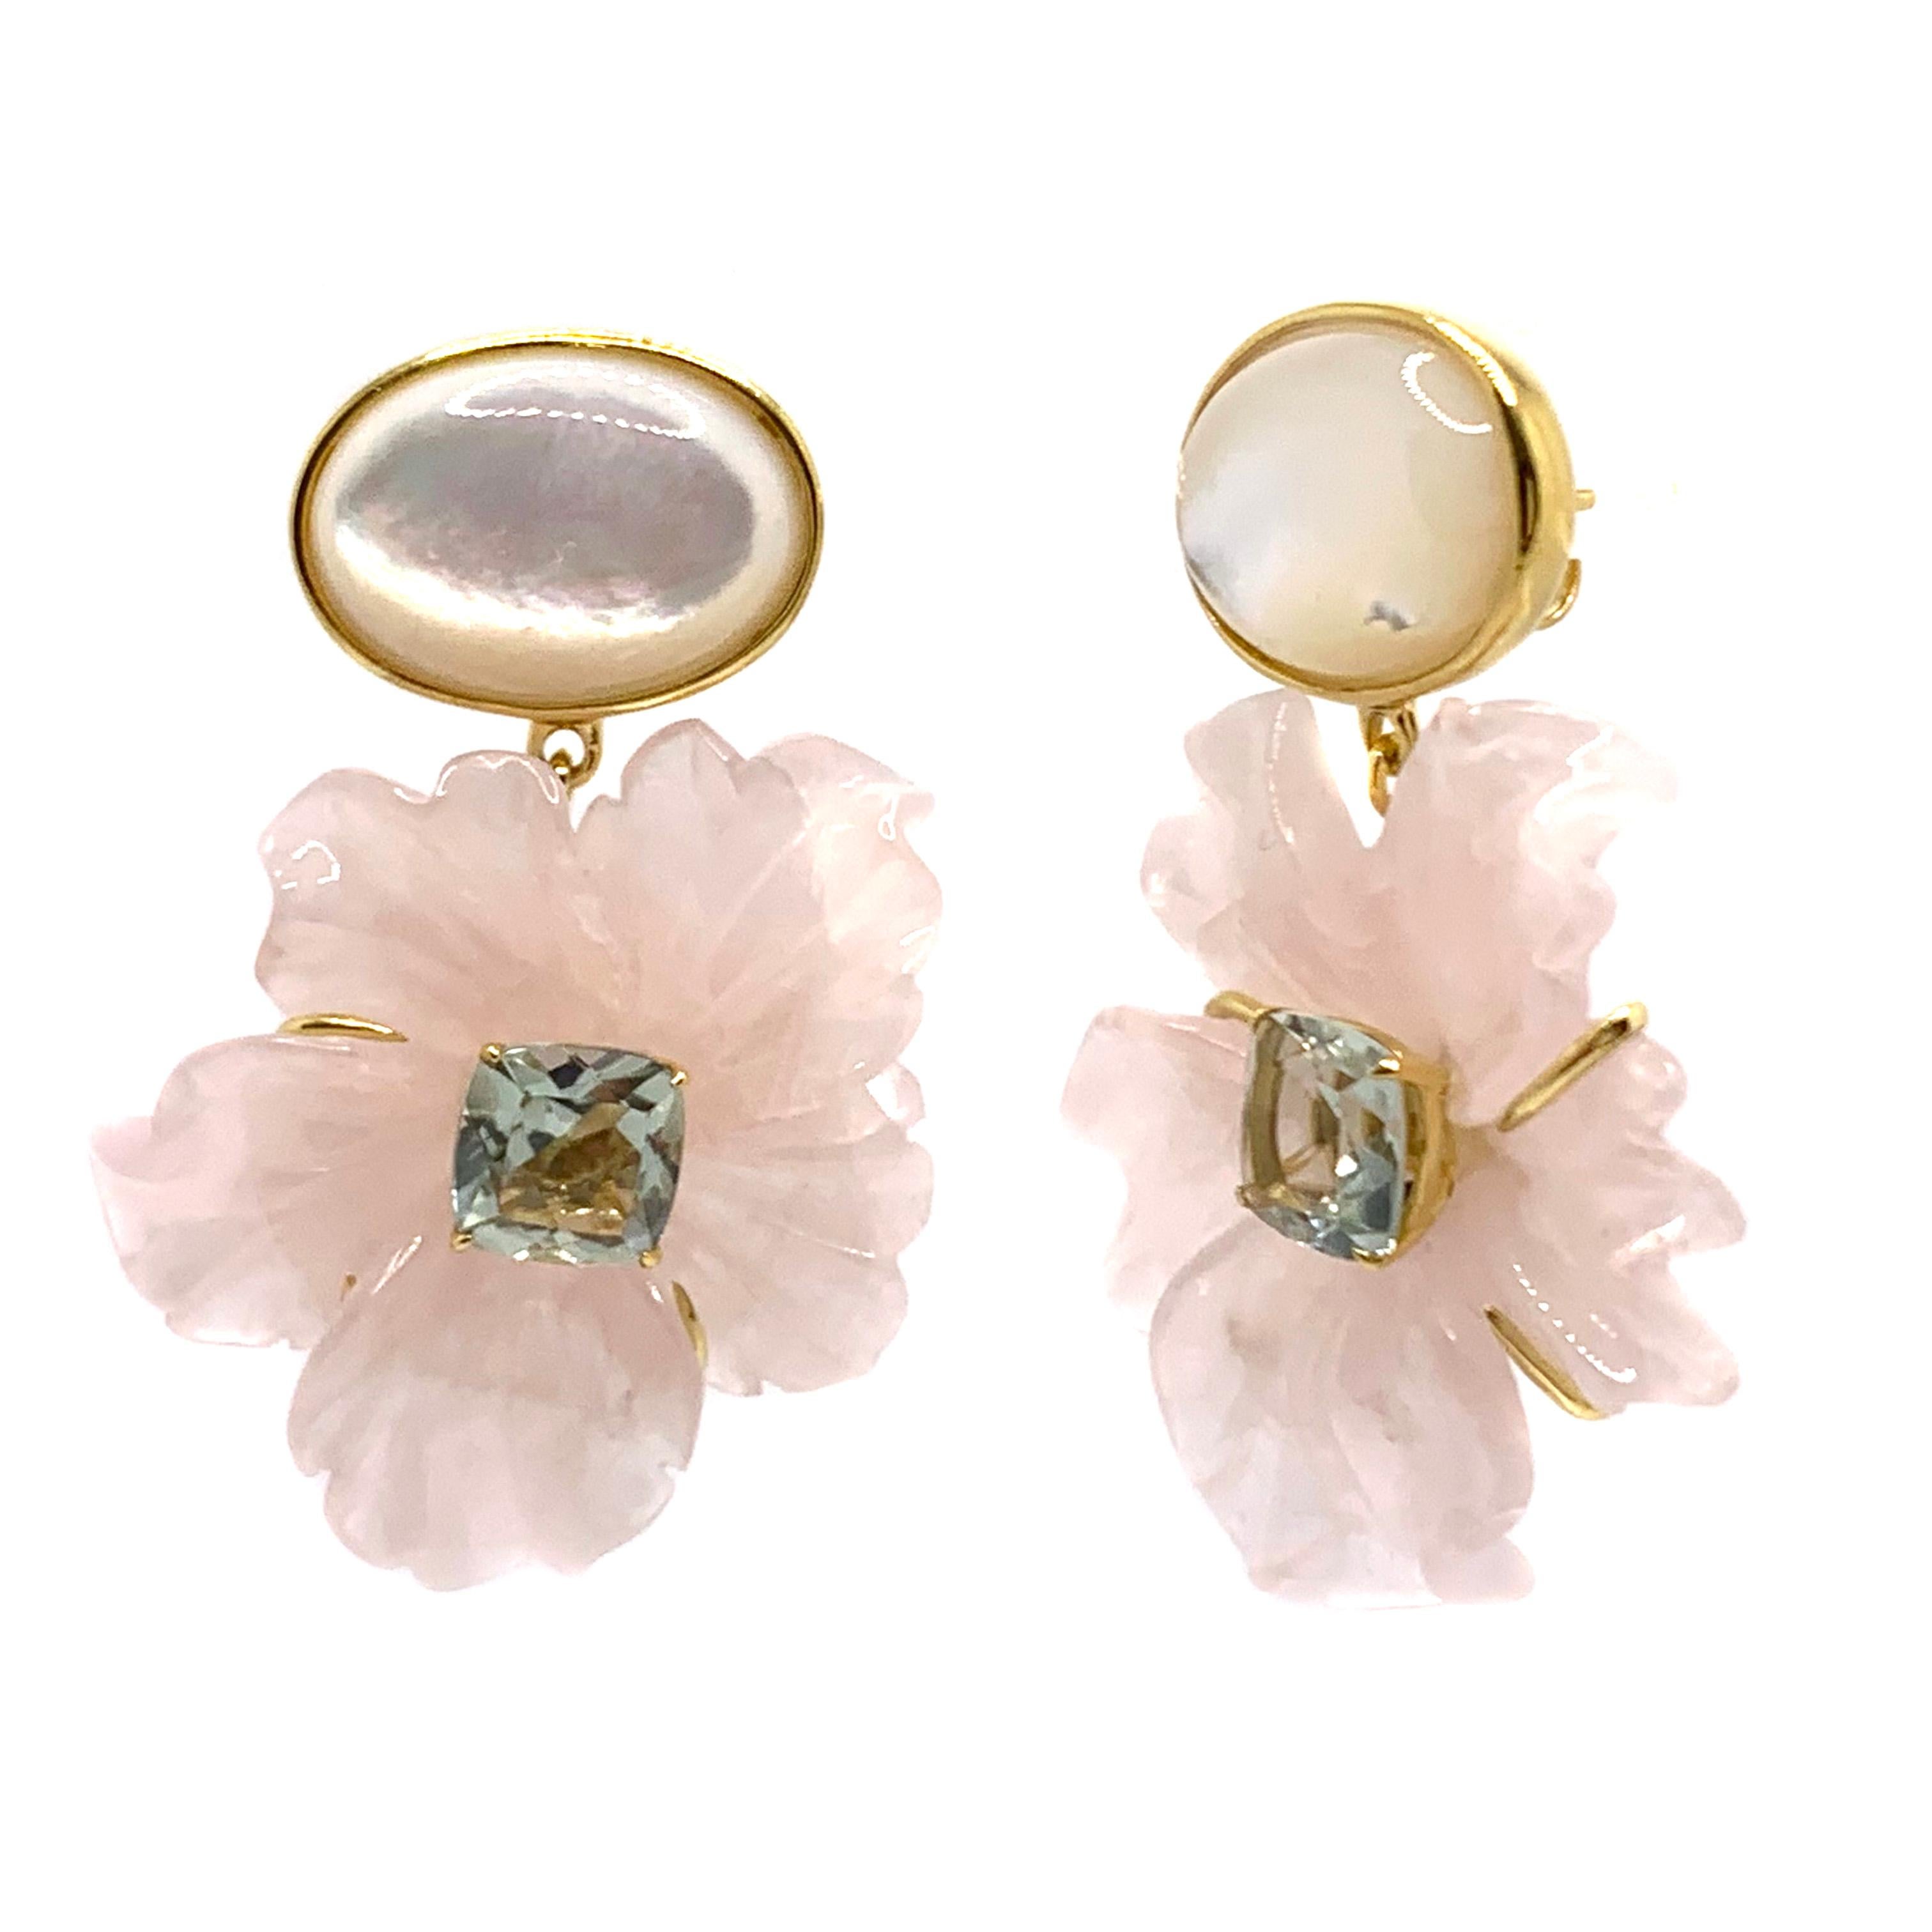 Stunning Cabochon Mother of Pearl and Carved Rose Quartz Flower Drop Earrings

This gorgeous pair of earrings features oval cabochon-cut mother of pearl and beautifully 3D carved rose quartz flower with cushion-cut green amethyst in center, handset